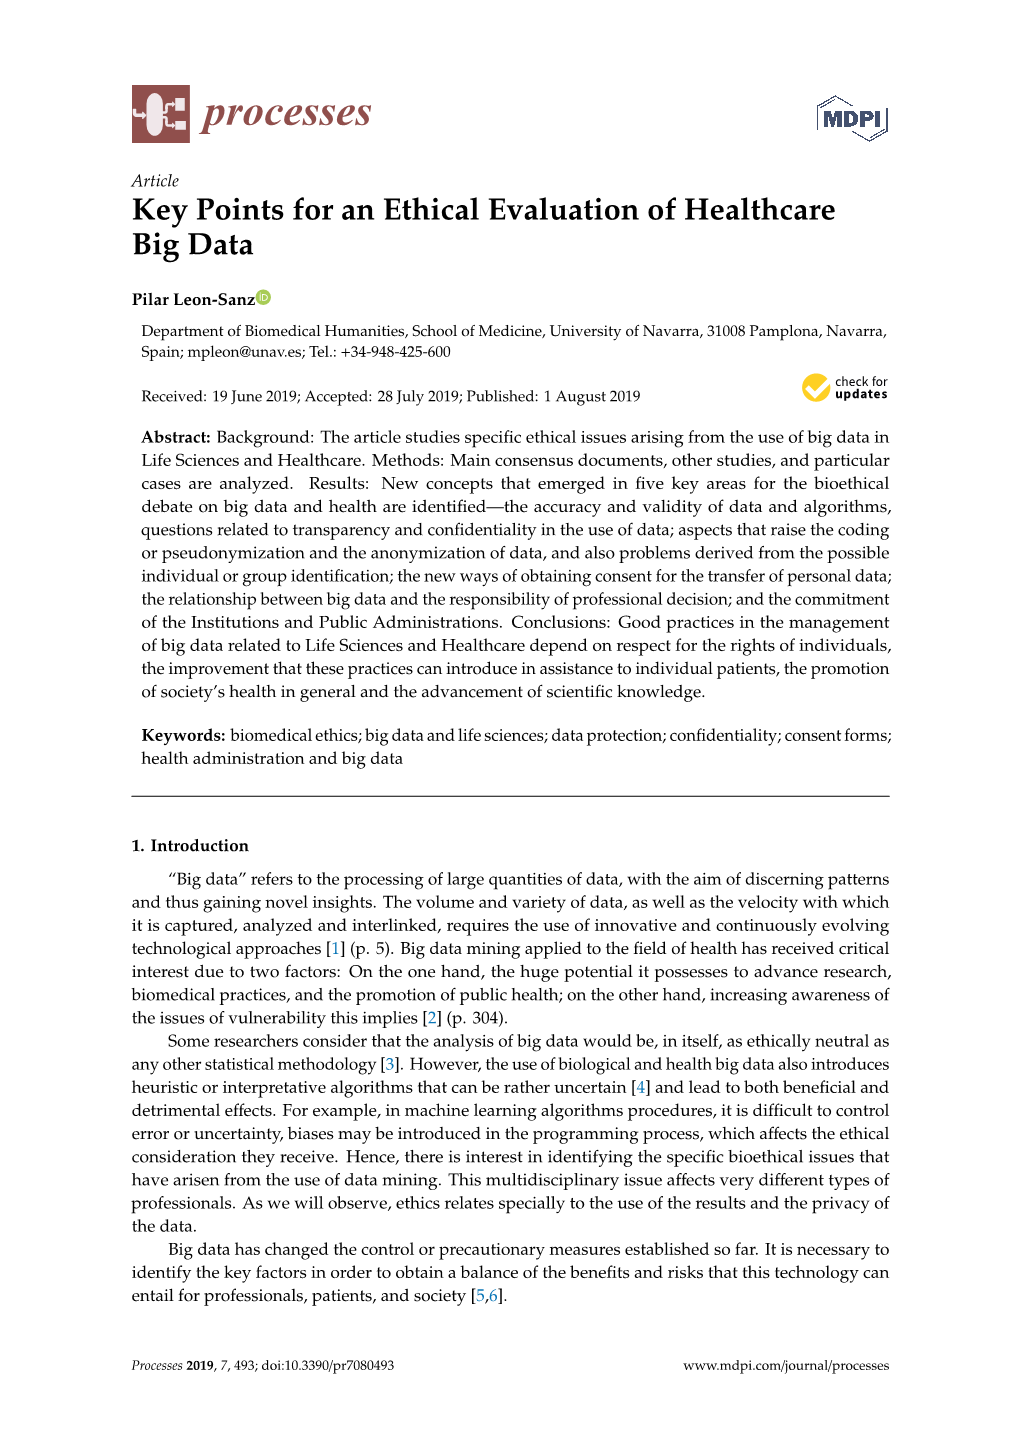 Key Points for an Ethical Evaluation of Healthcare Big Data